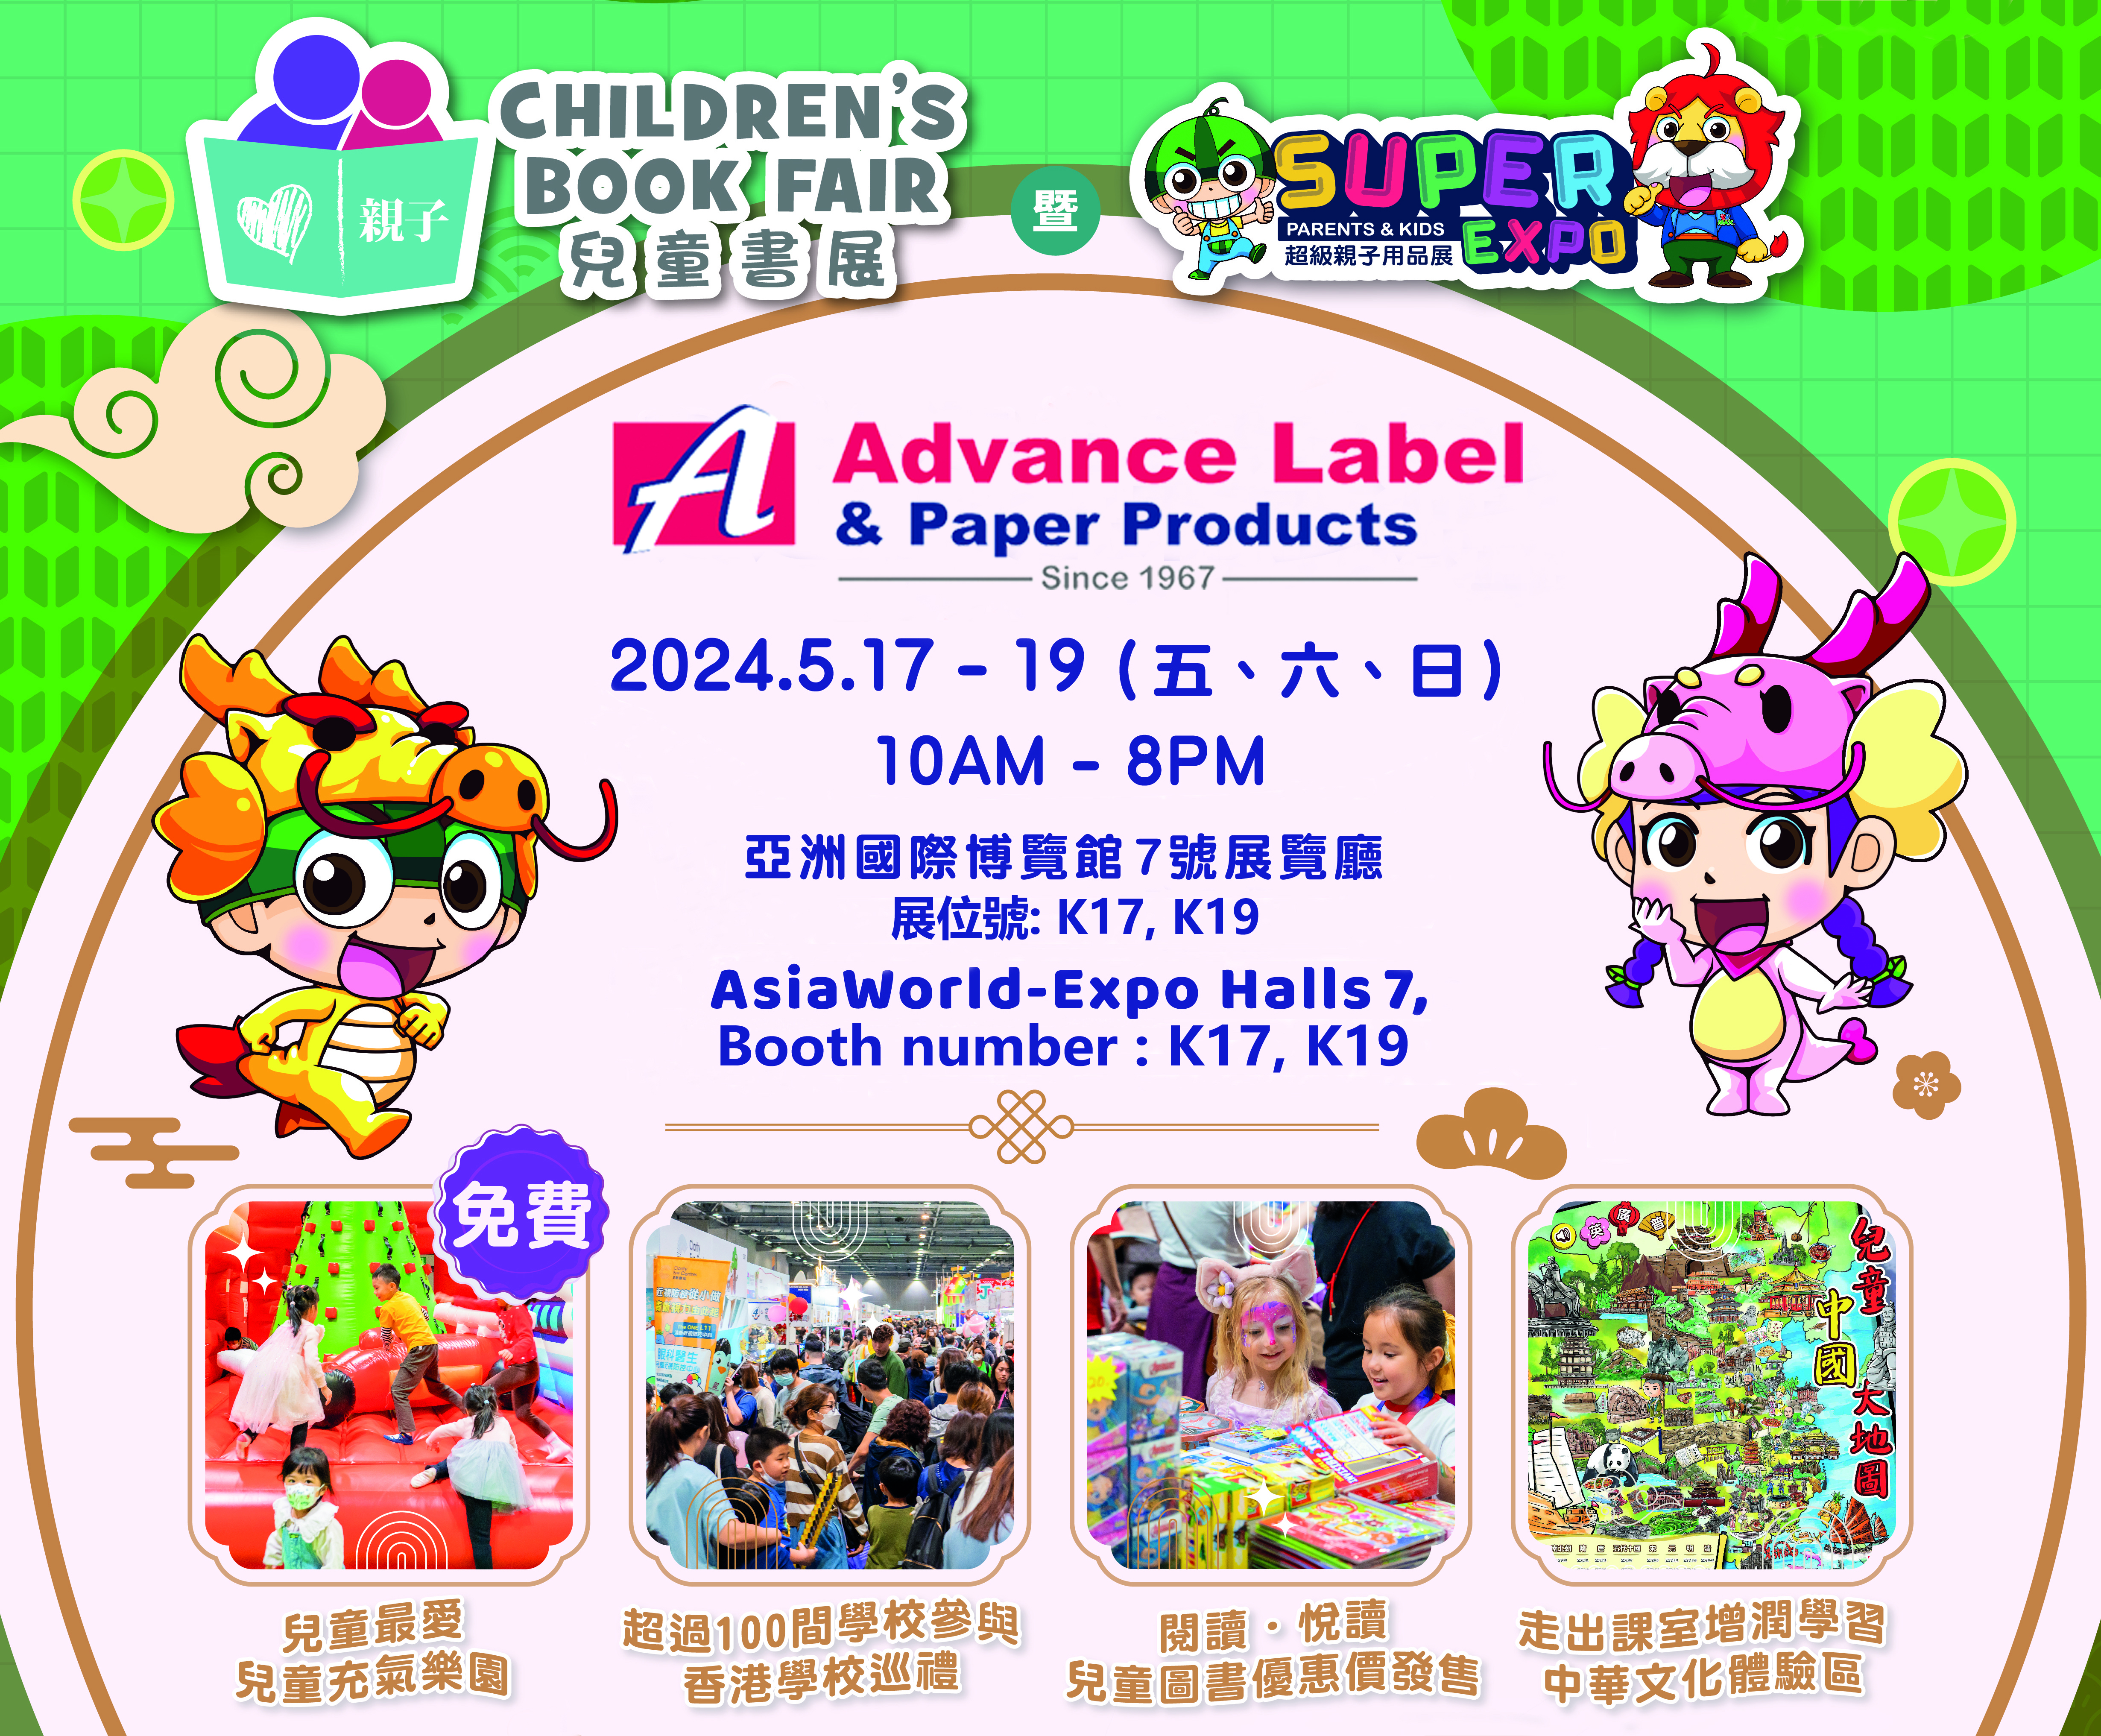 Advance Label will take part in Children's Book Fair and Super Parents & Kids Expo 2024